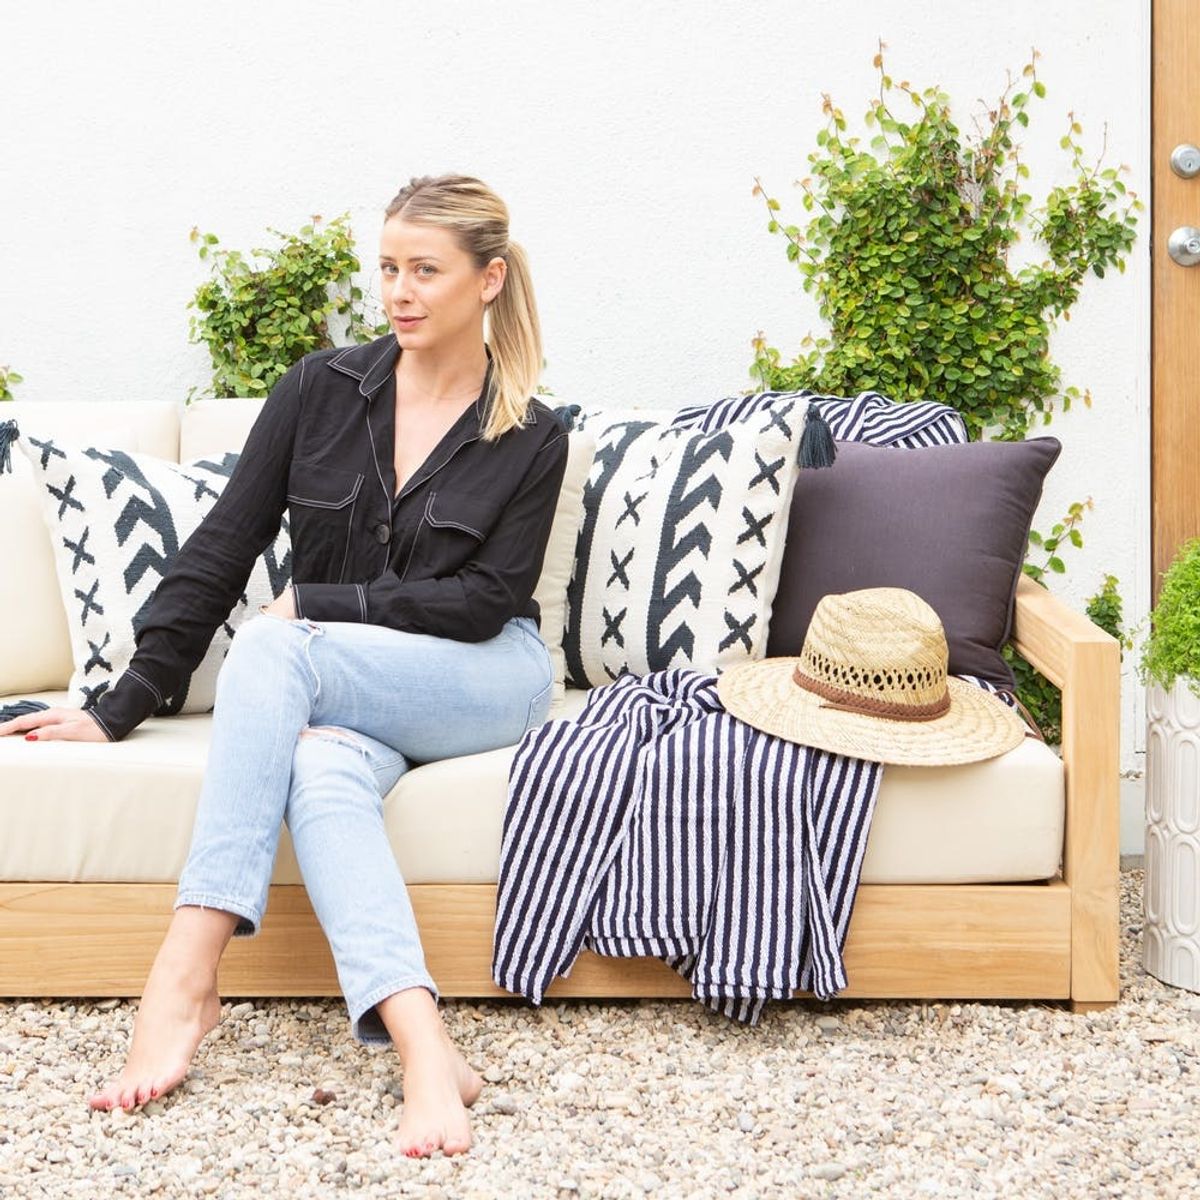 Lo Bosworth’s Backyard Makeover Is Serious Cali-Cool Goals